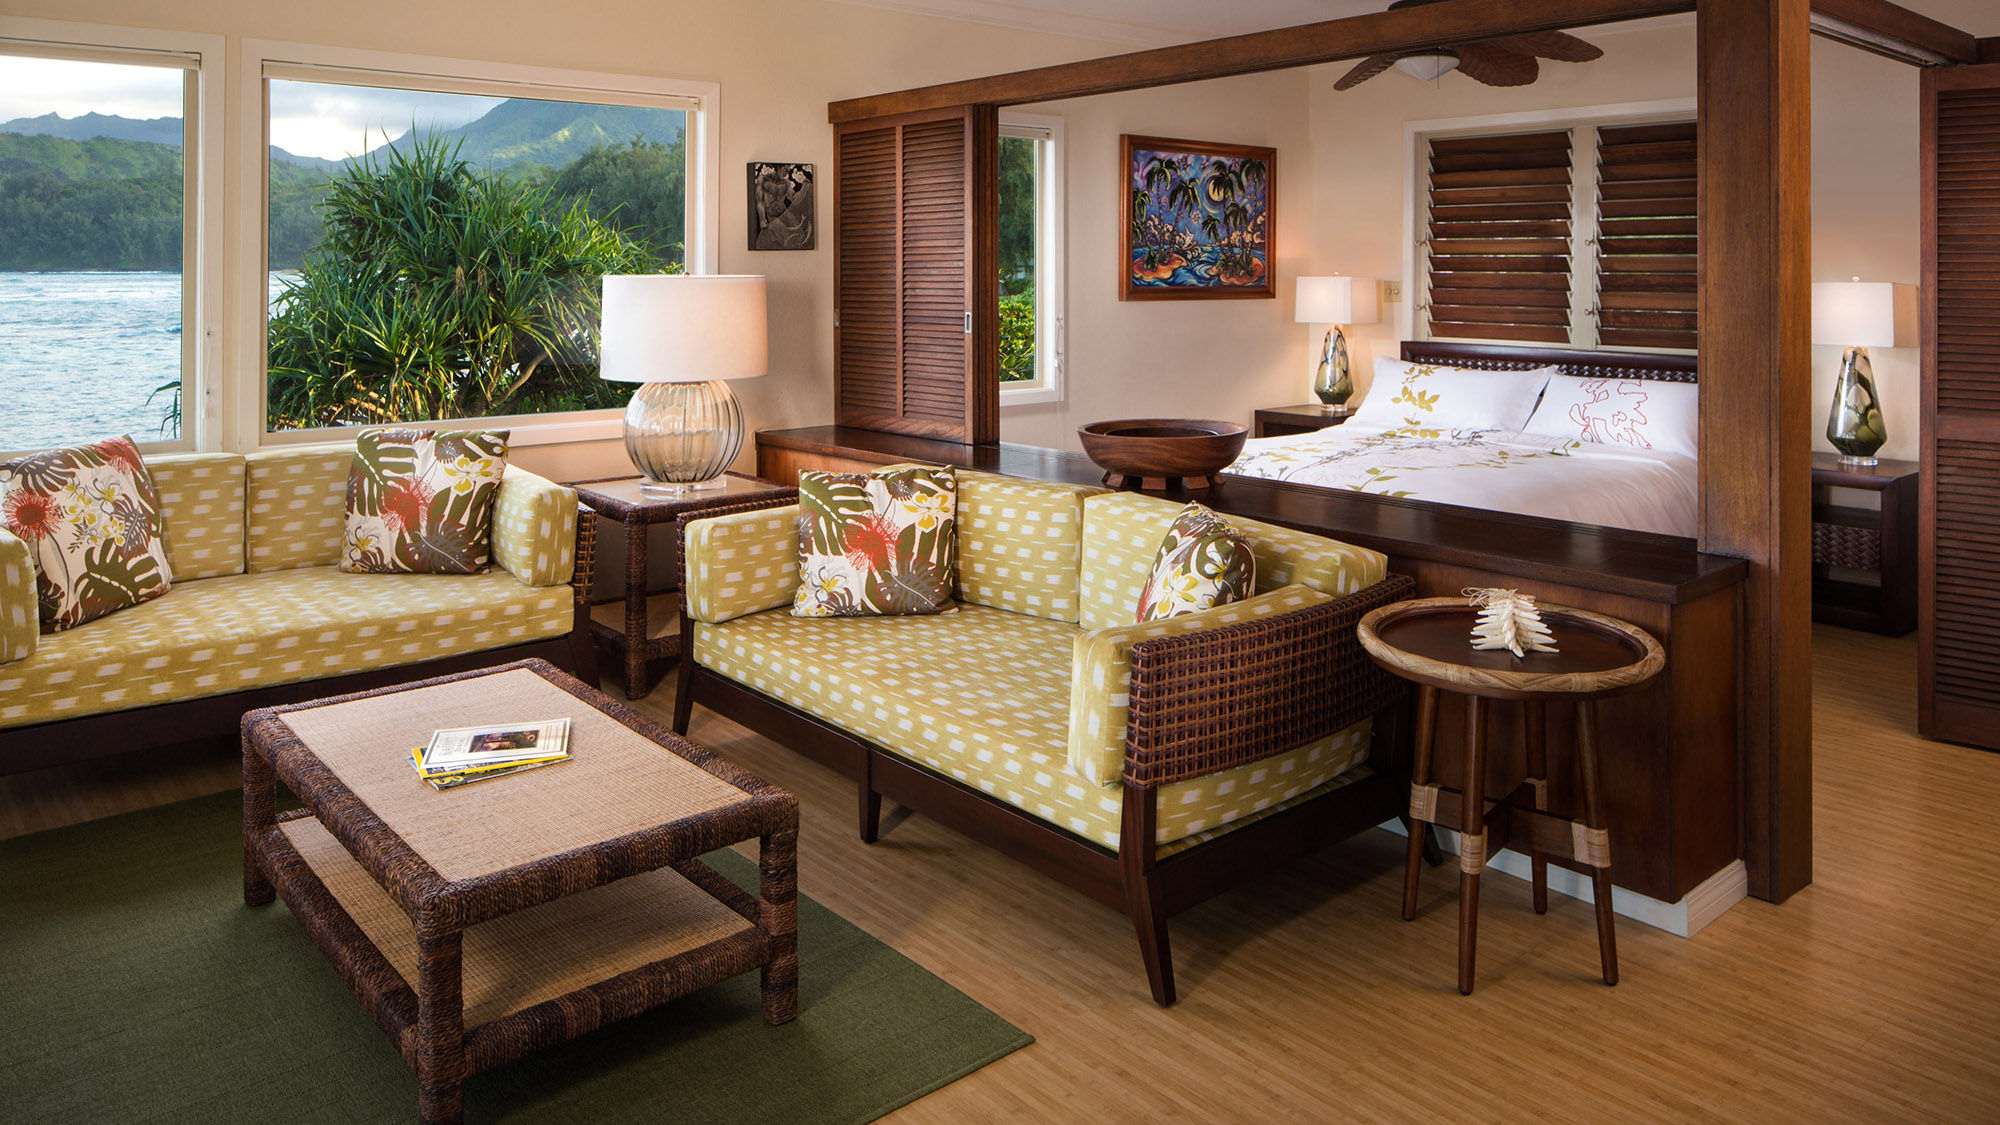 A guestroom at the Hanalei Colony Resort, which is belatedly celebrating its 50th anniversary in May.